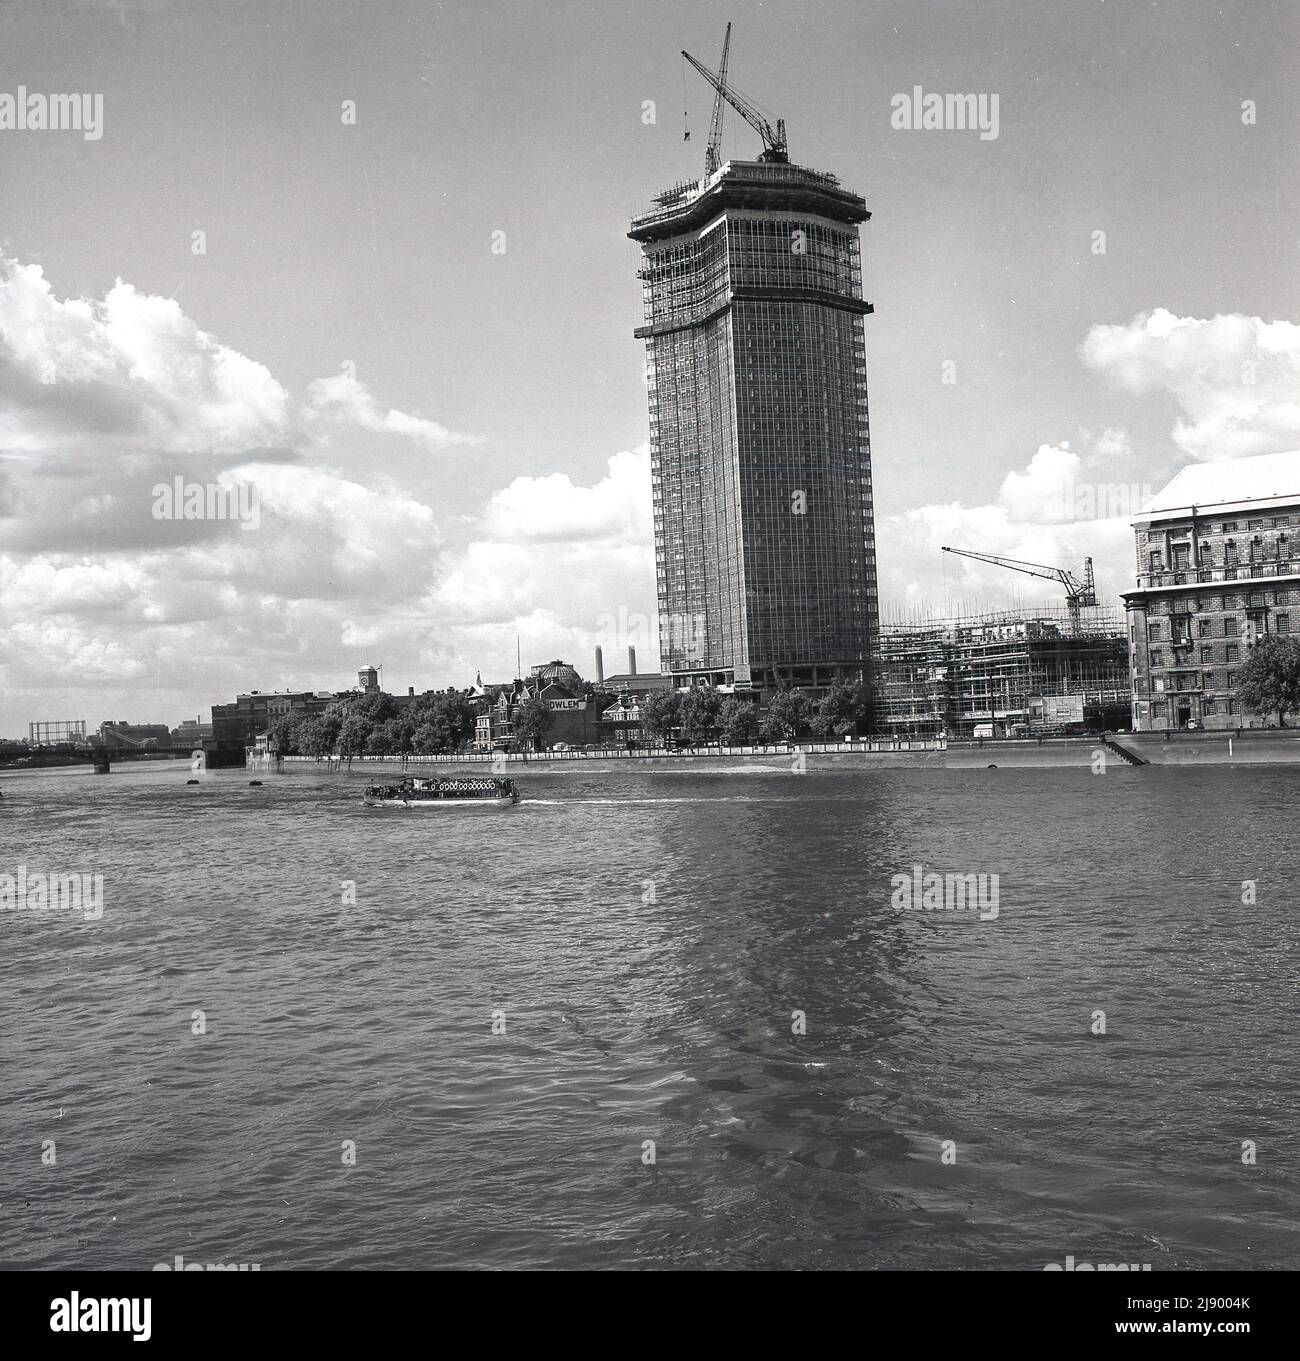 1962, historical, view from the river Thames of a new high-rise office building under construction on the South Bank of the river, London, England, UK. Built by John Mowlem & Co for the British engineering company, Vickers and originally known as Vickers House or Tower, it later became known as Millbank Tower.  Construction on this modern skyscraper started in 1959 and on completion in 1963, it became the tallest building in the UK at 387ft. In the 1990s, the building became famous as the headquarters of the Labour Party. It was Grade II listed in 1995. Stock Photo